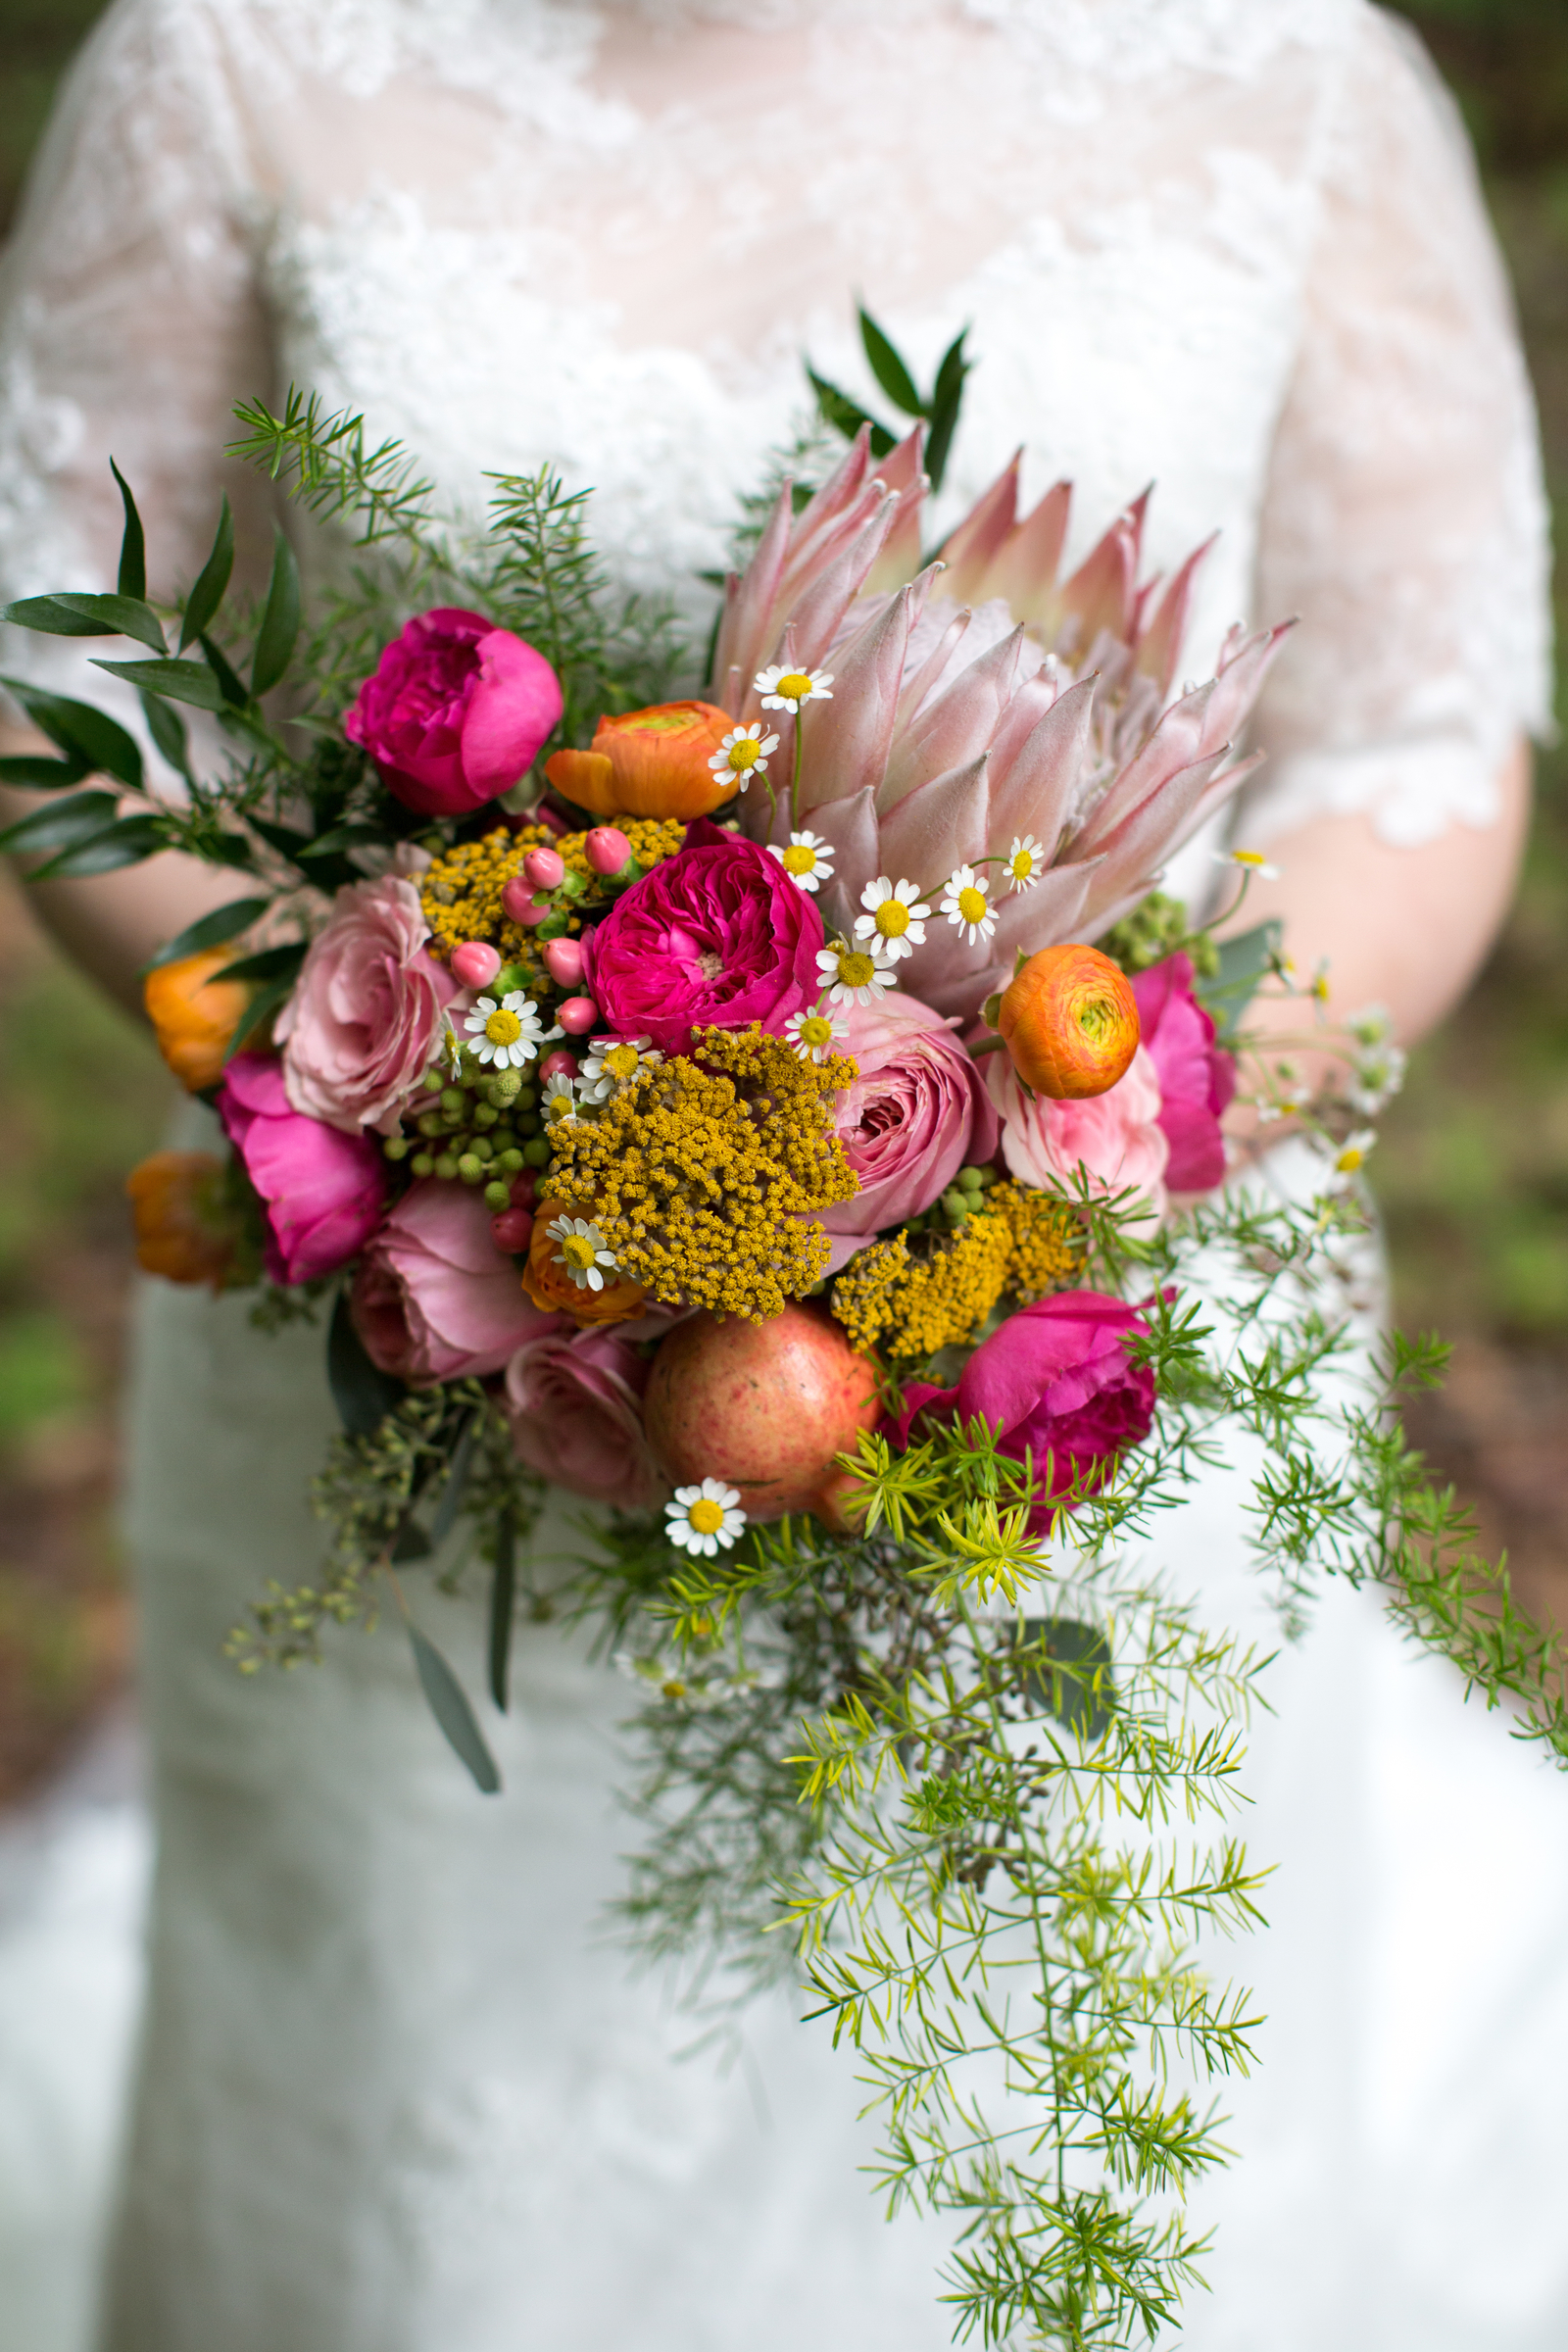 Bridal Bouquet with King Protea, Garden Roses, and Ranunculus